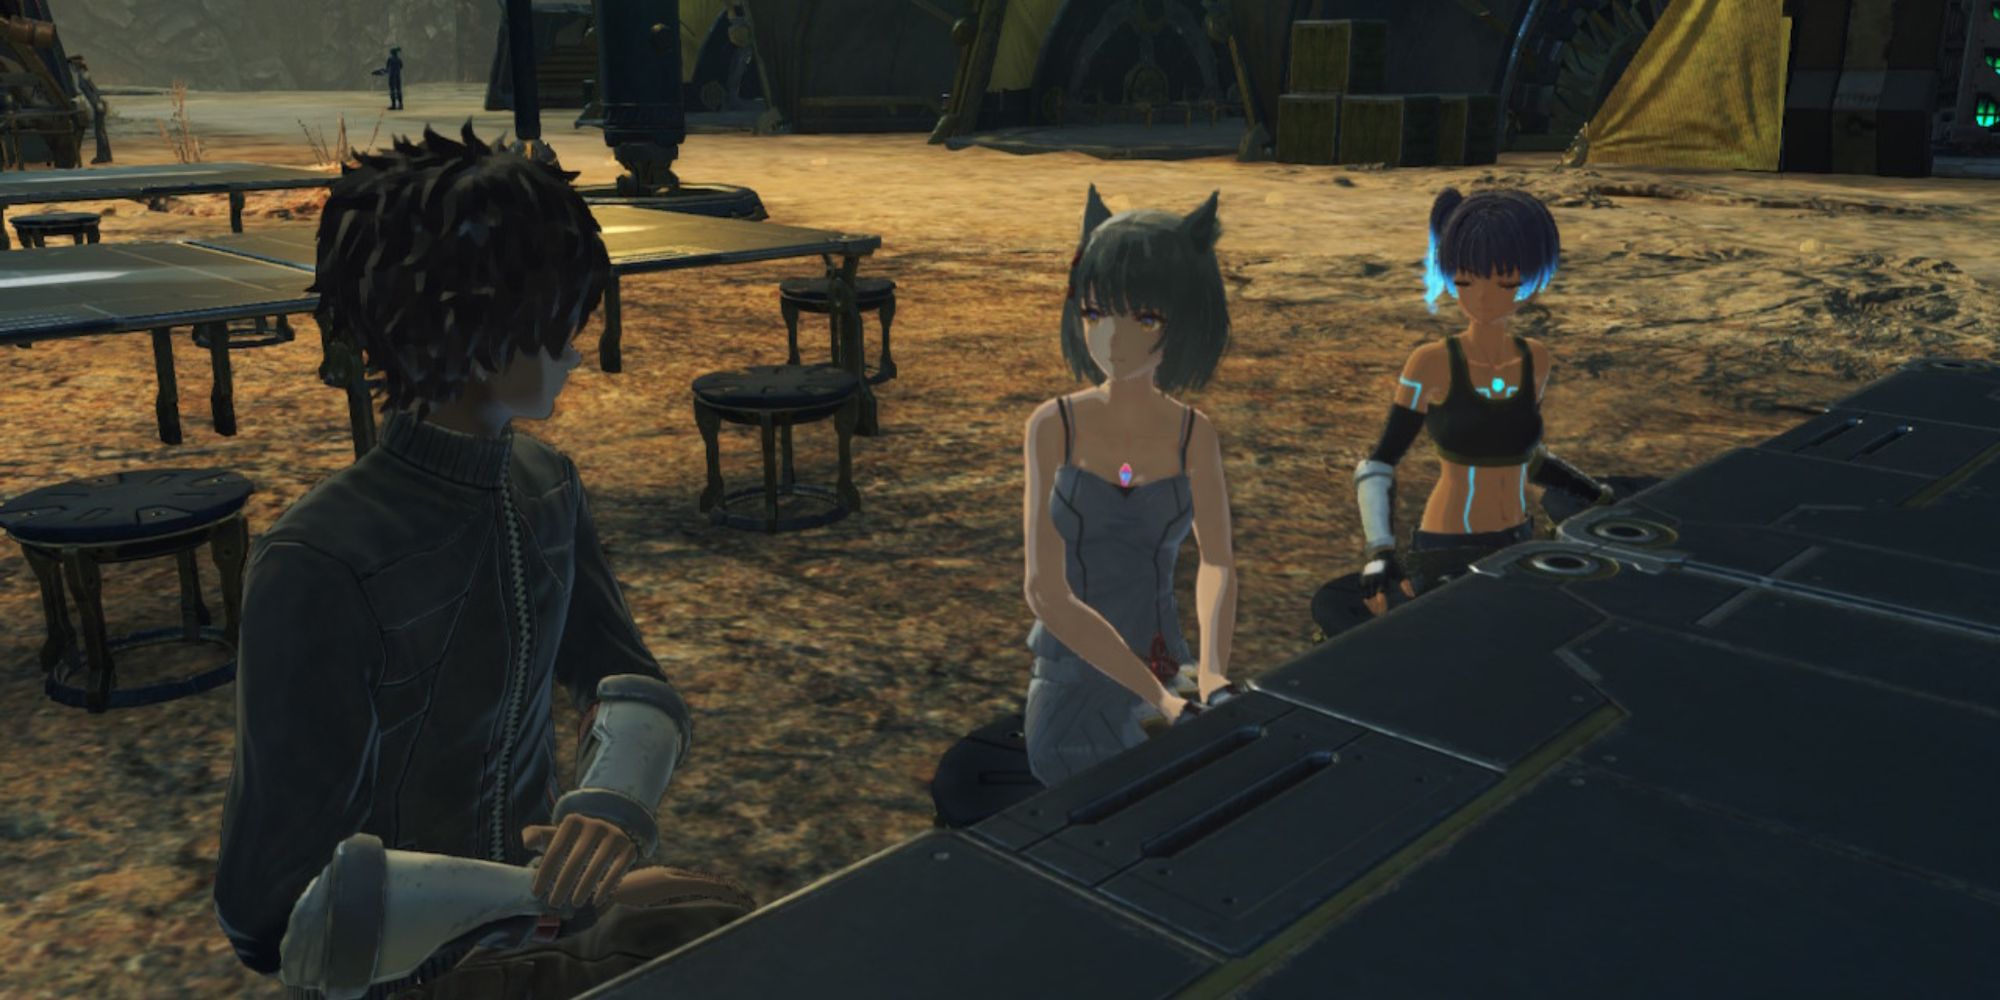 [From left to right] Taion, Sena, and Mio Discussing a Topic in Xenoblade Chronicles 3